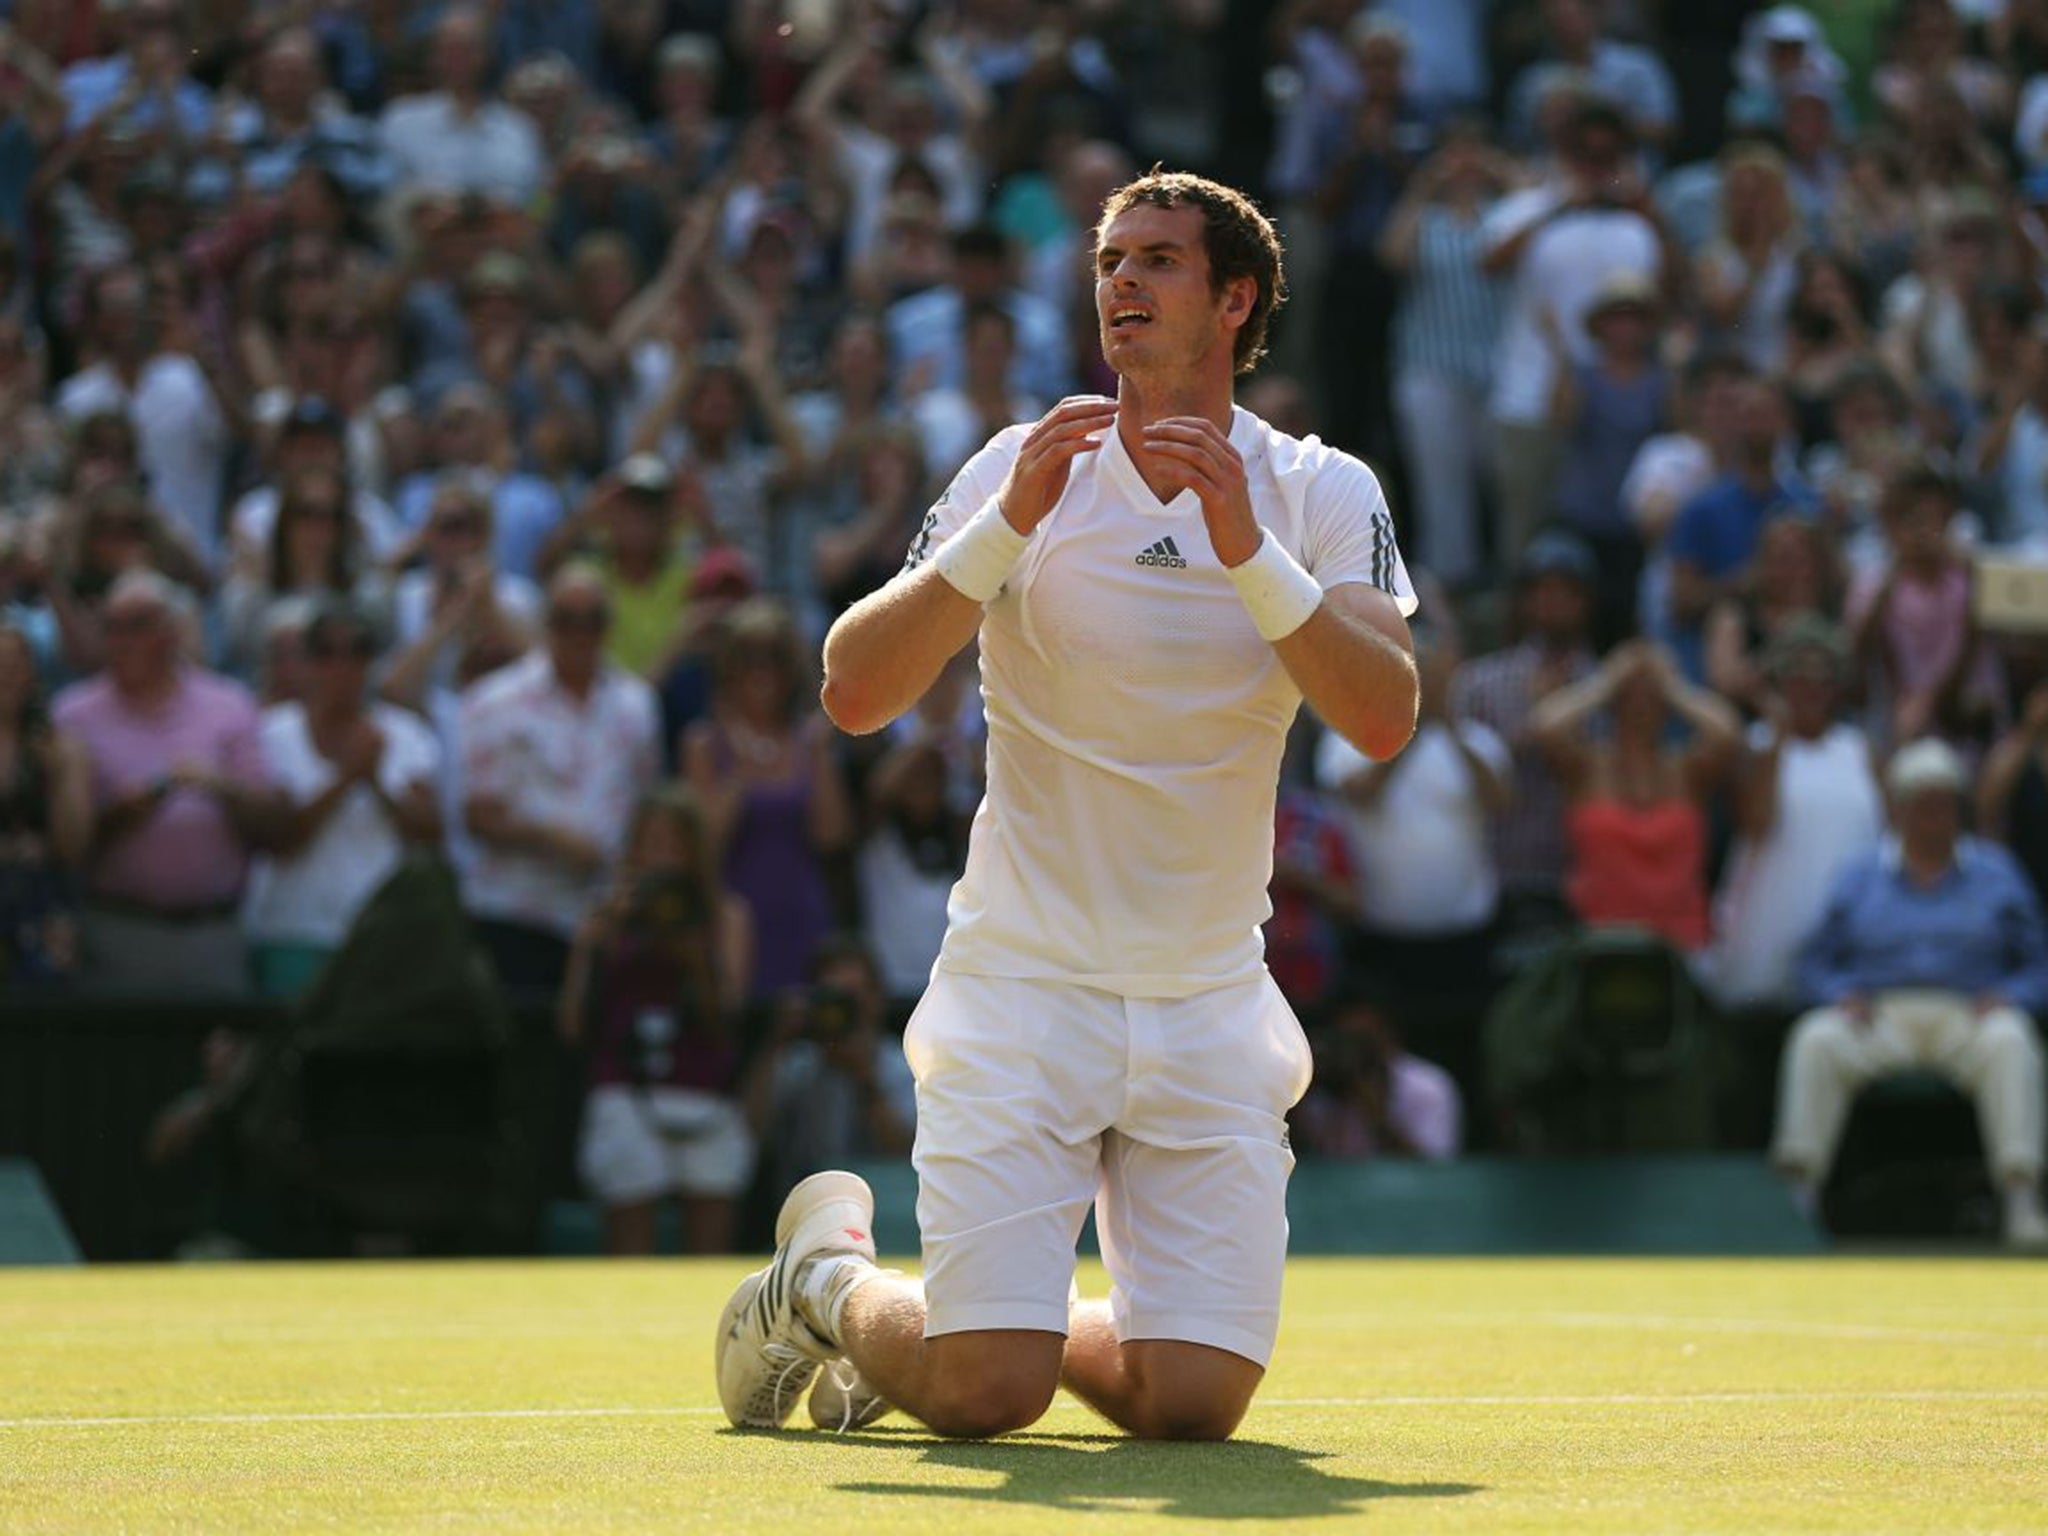 Murray makes history for Great Britain as he wins the 2013 Wimbledon title